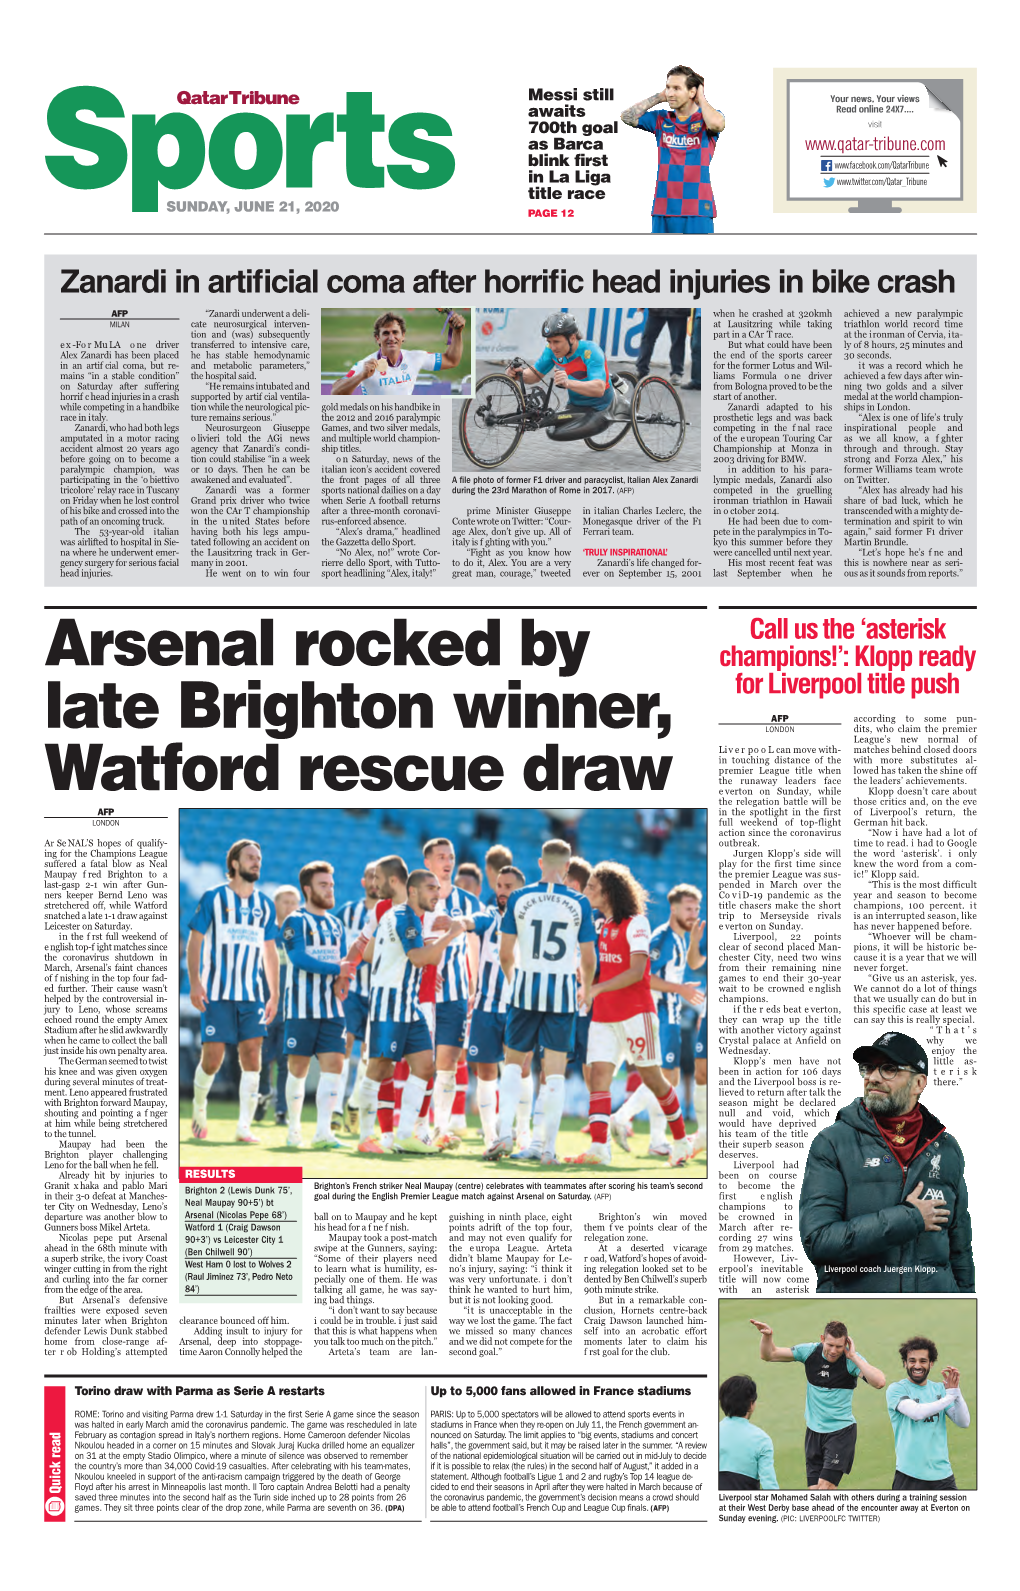 Arsenal Rocked by Late Brighton Winner, Watford Rescue Draw